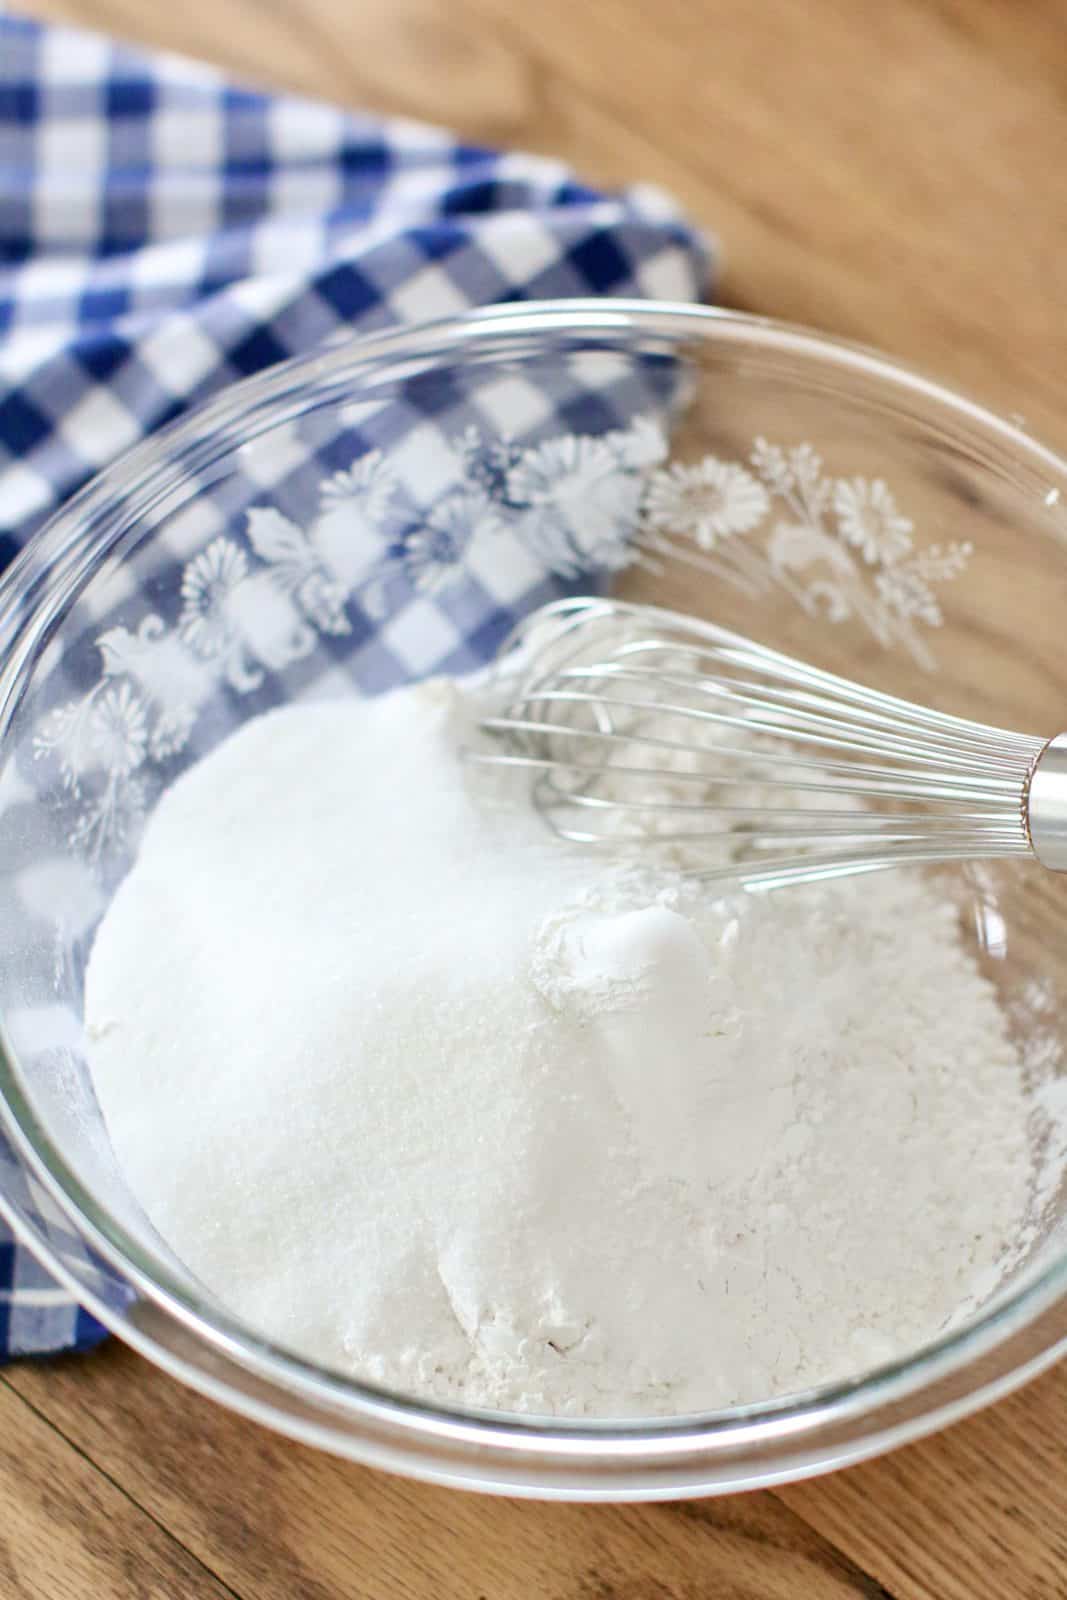 flour, sugar, baking powder and salt in a glass bowl with a metal whisk.